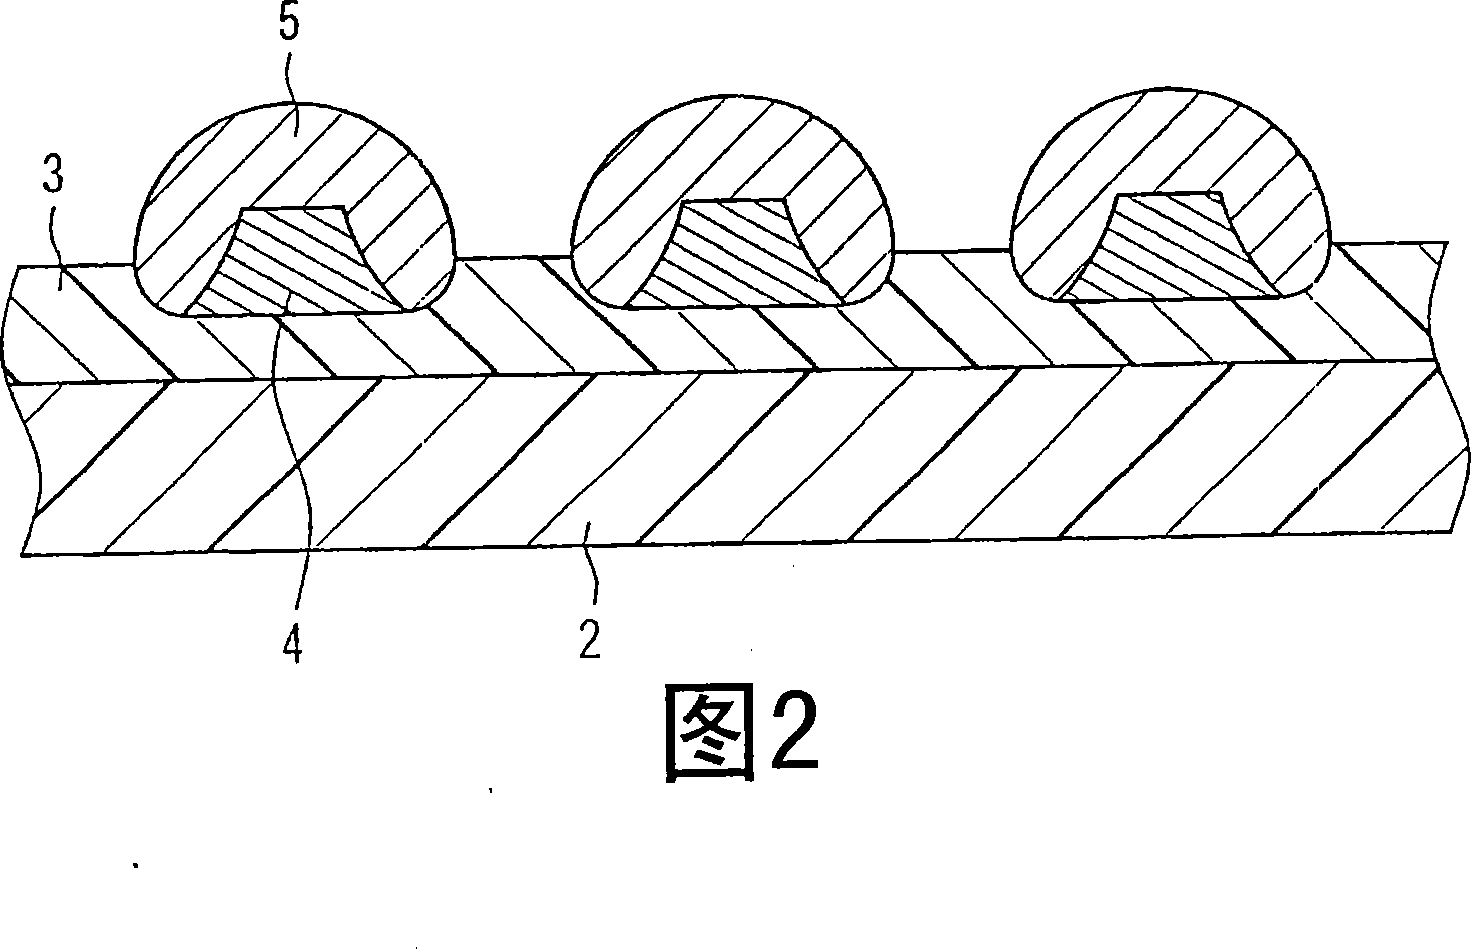 Wiring board, method for manufacturing the same, and semiconductor device